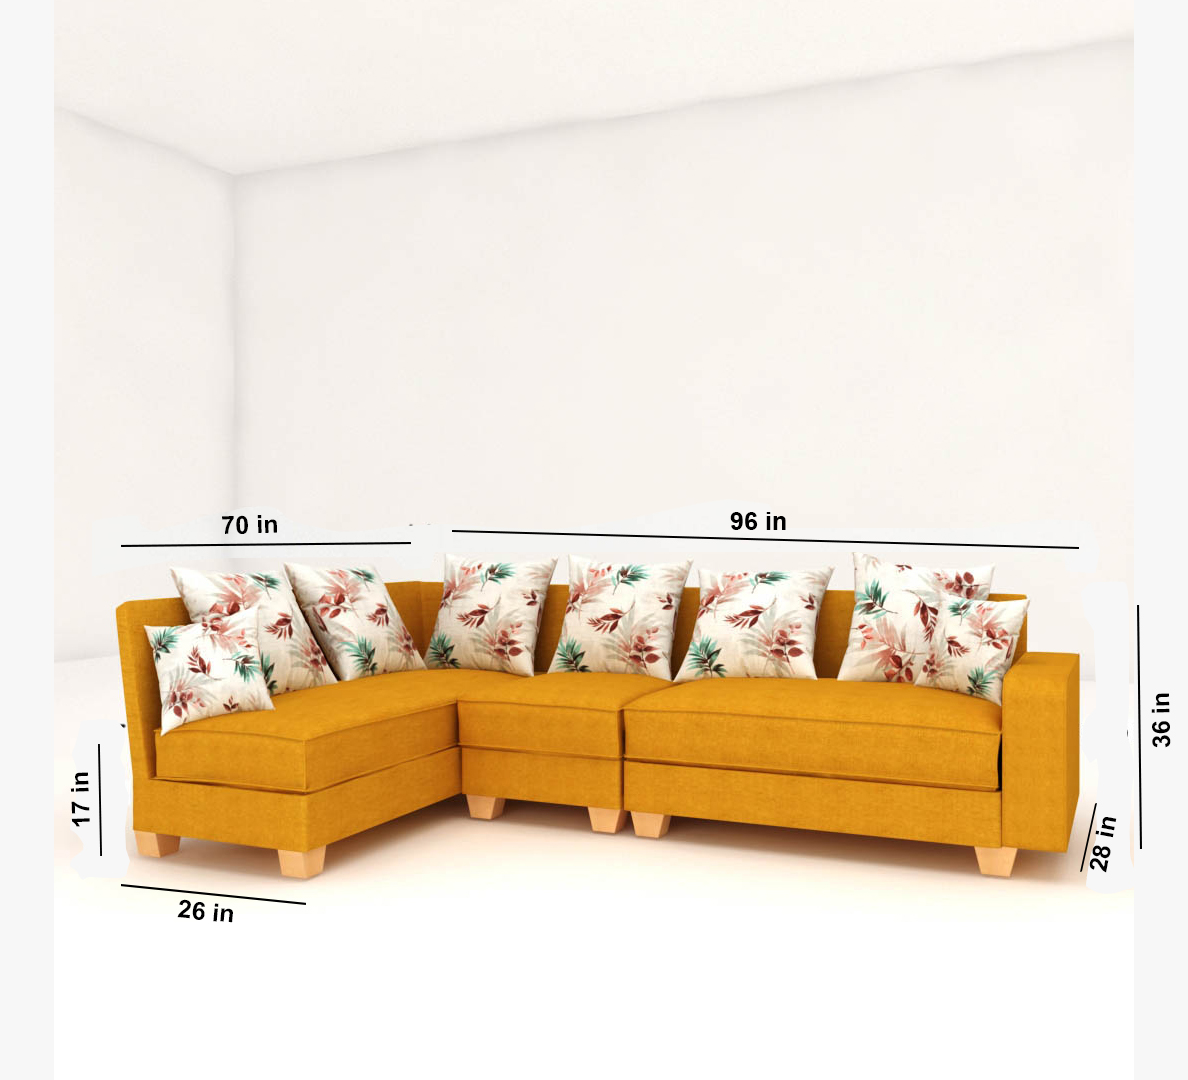 6 Seater RHS Sectional  Corner Sofa in Light Gold Color